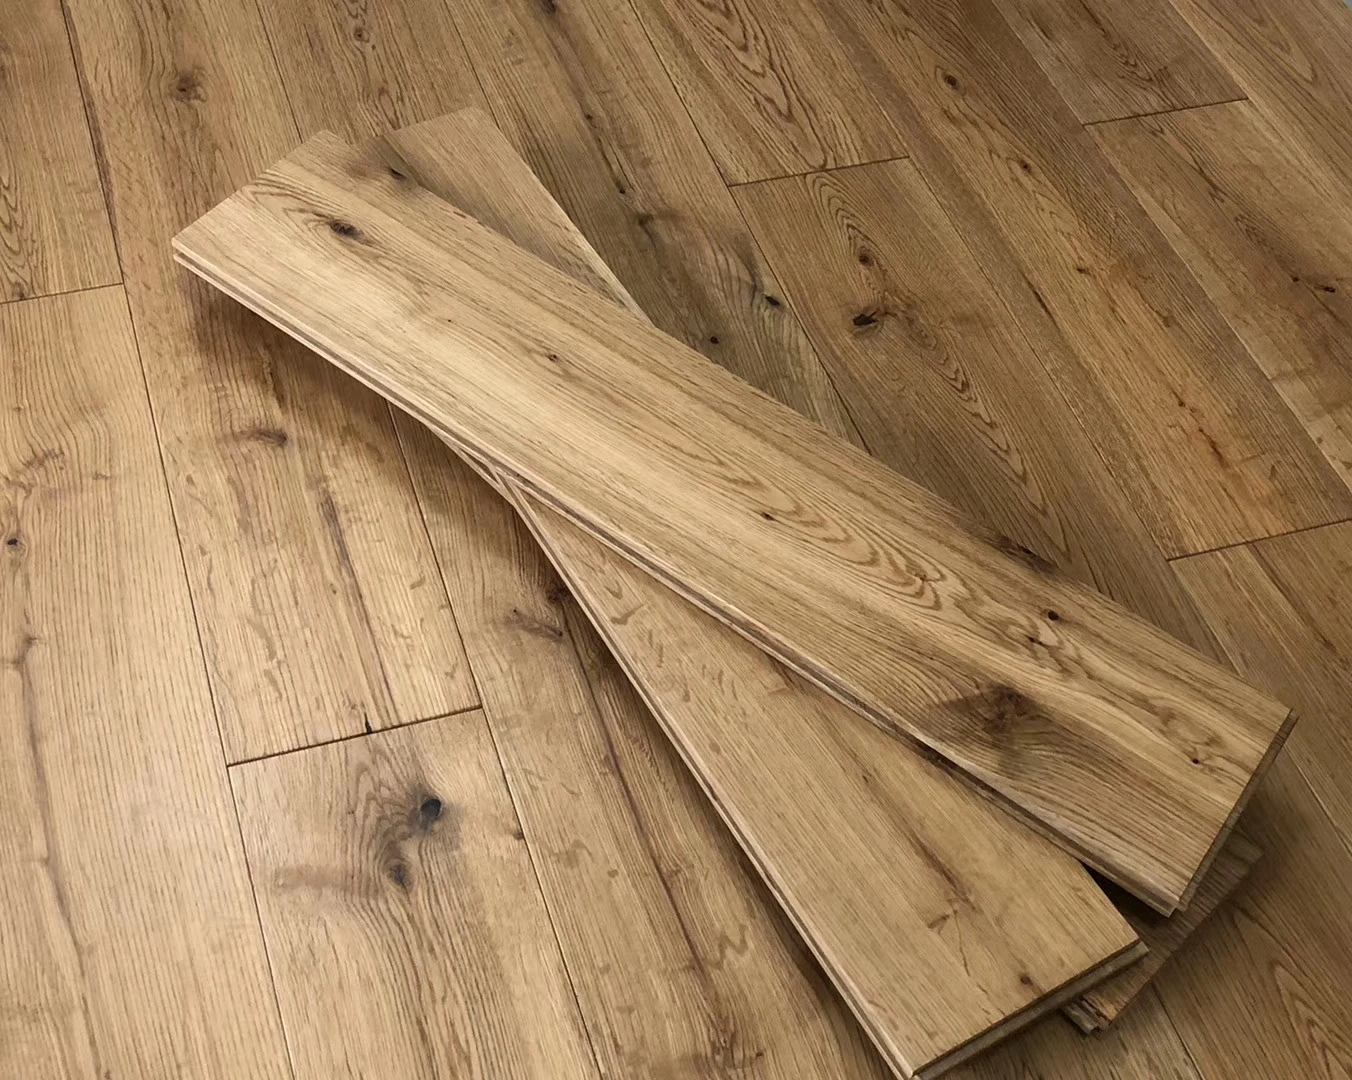 Natural Oiled Rustic Solid Oak Timber Flooring - 125x18mm